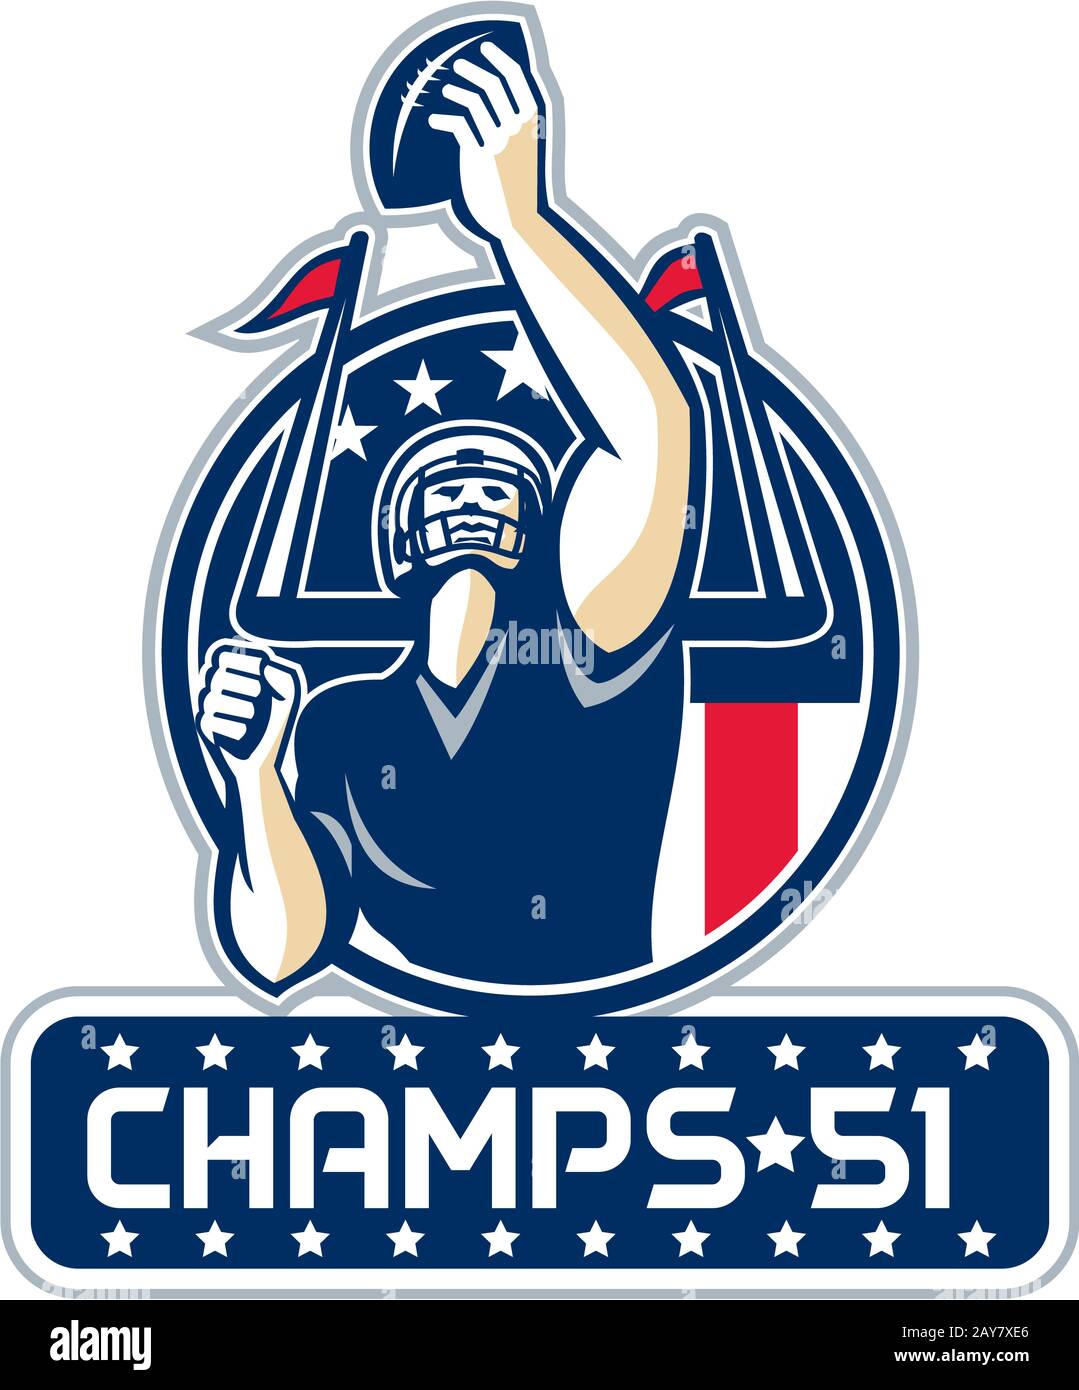 Football champs 51 New England Retro Banque D'Images